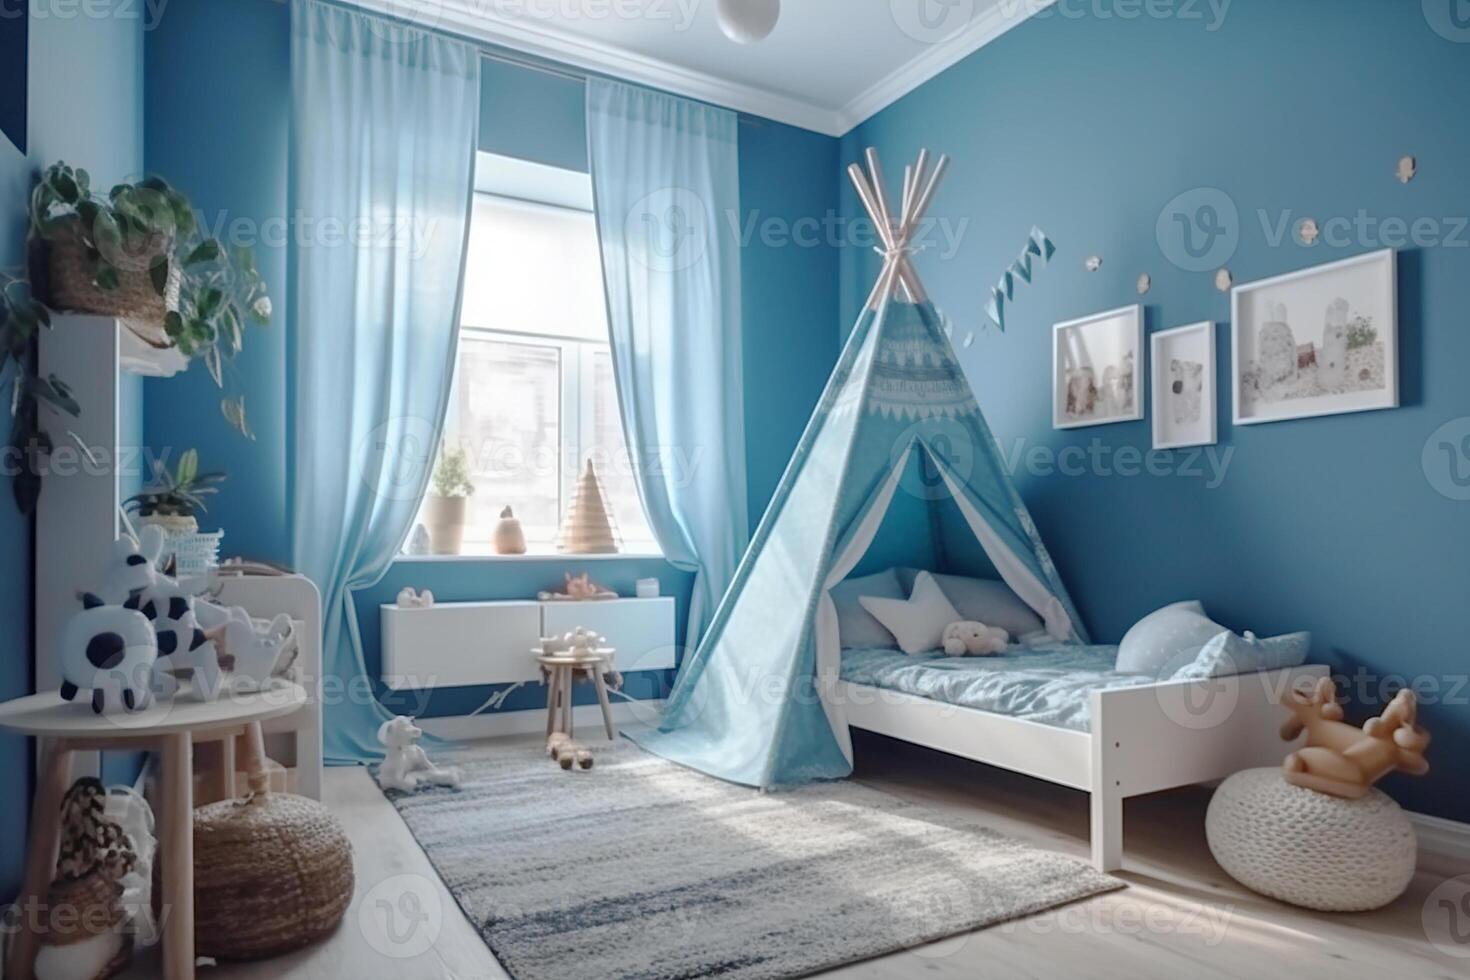 Modern Design of a child's room for a little boy in blue. photo